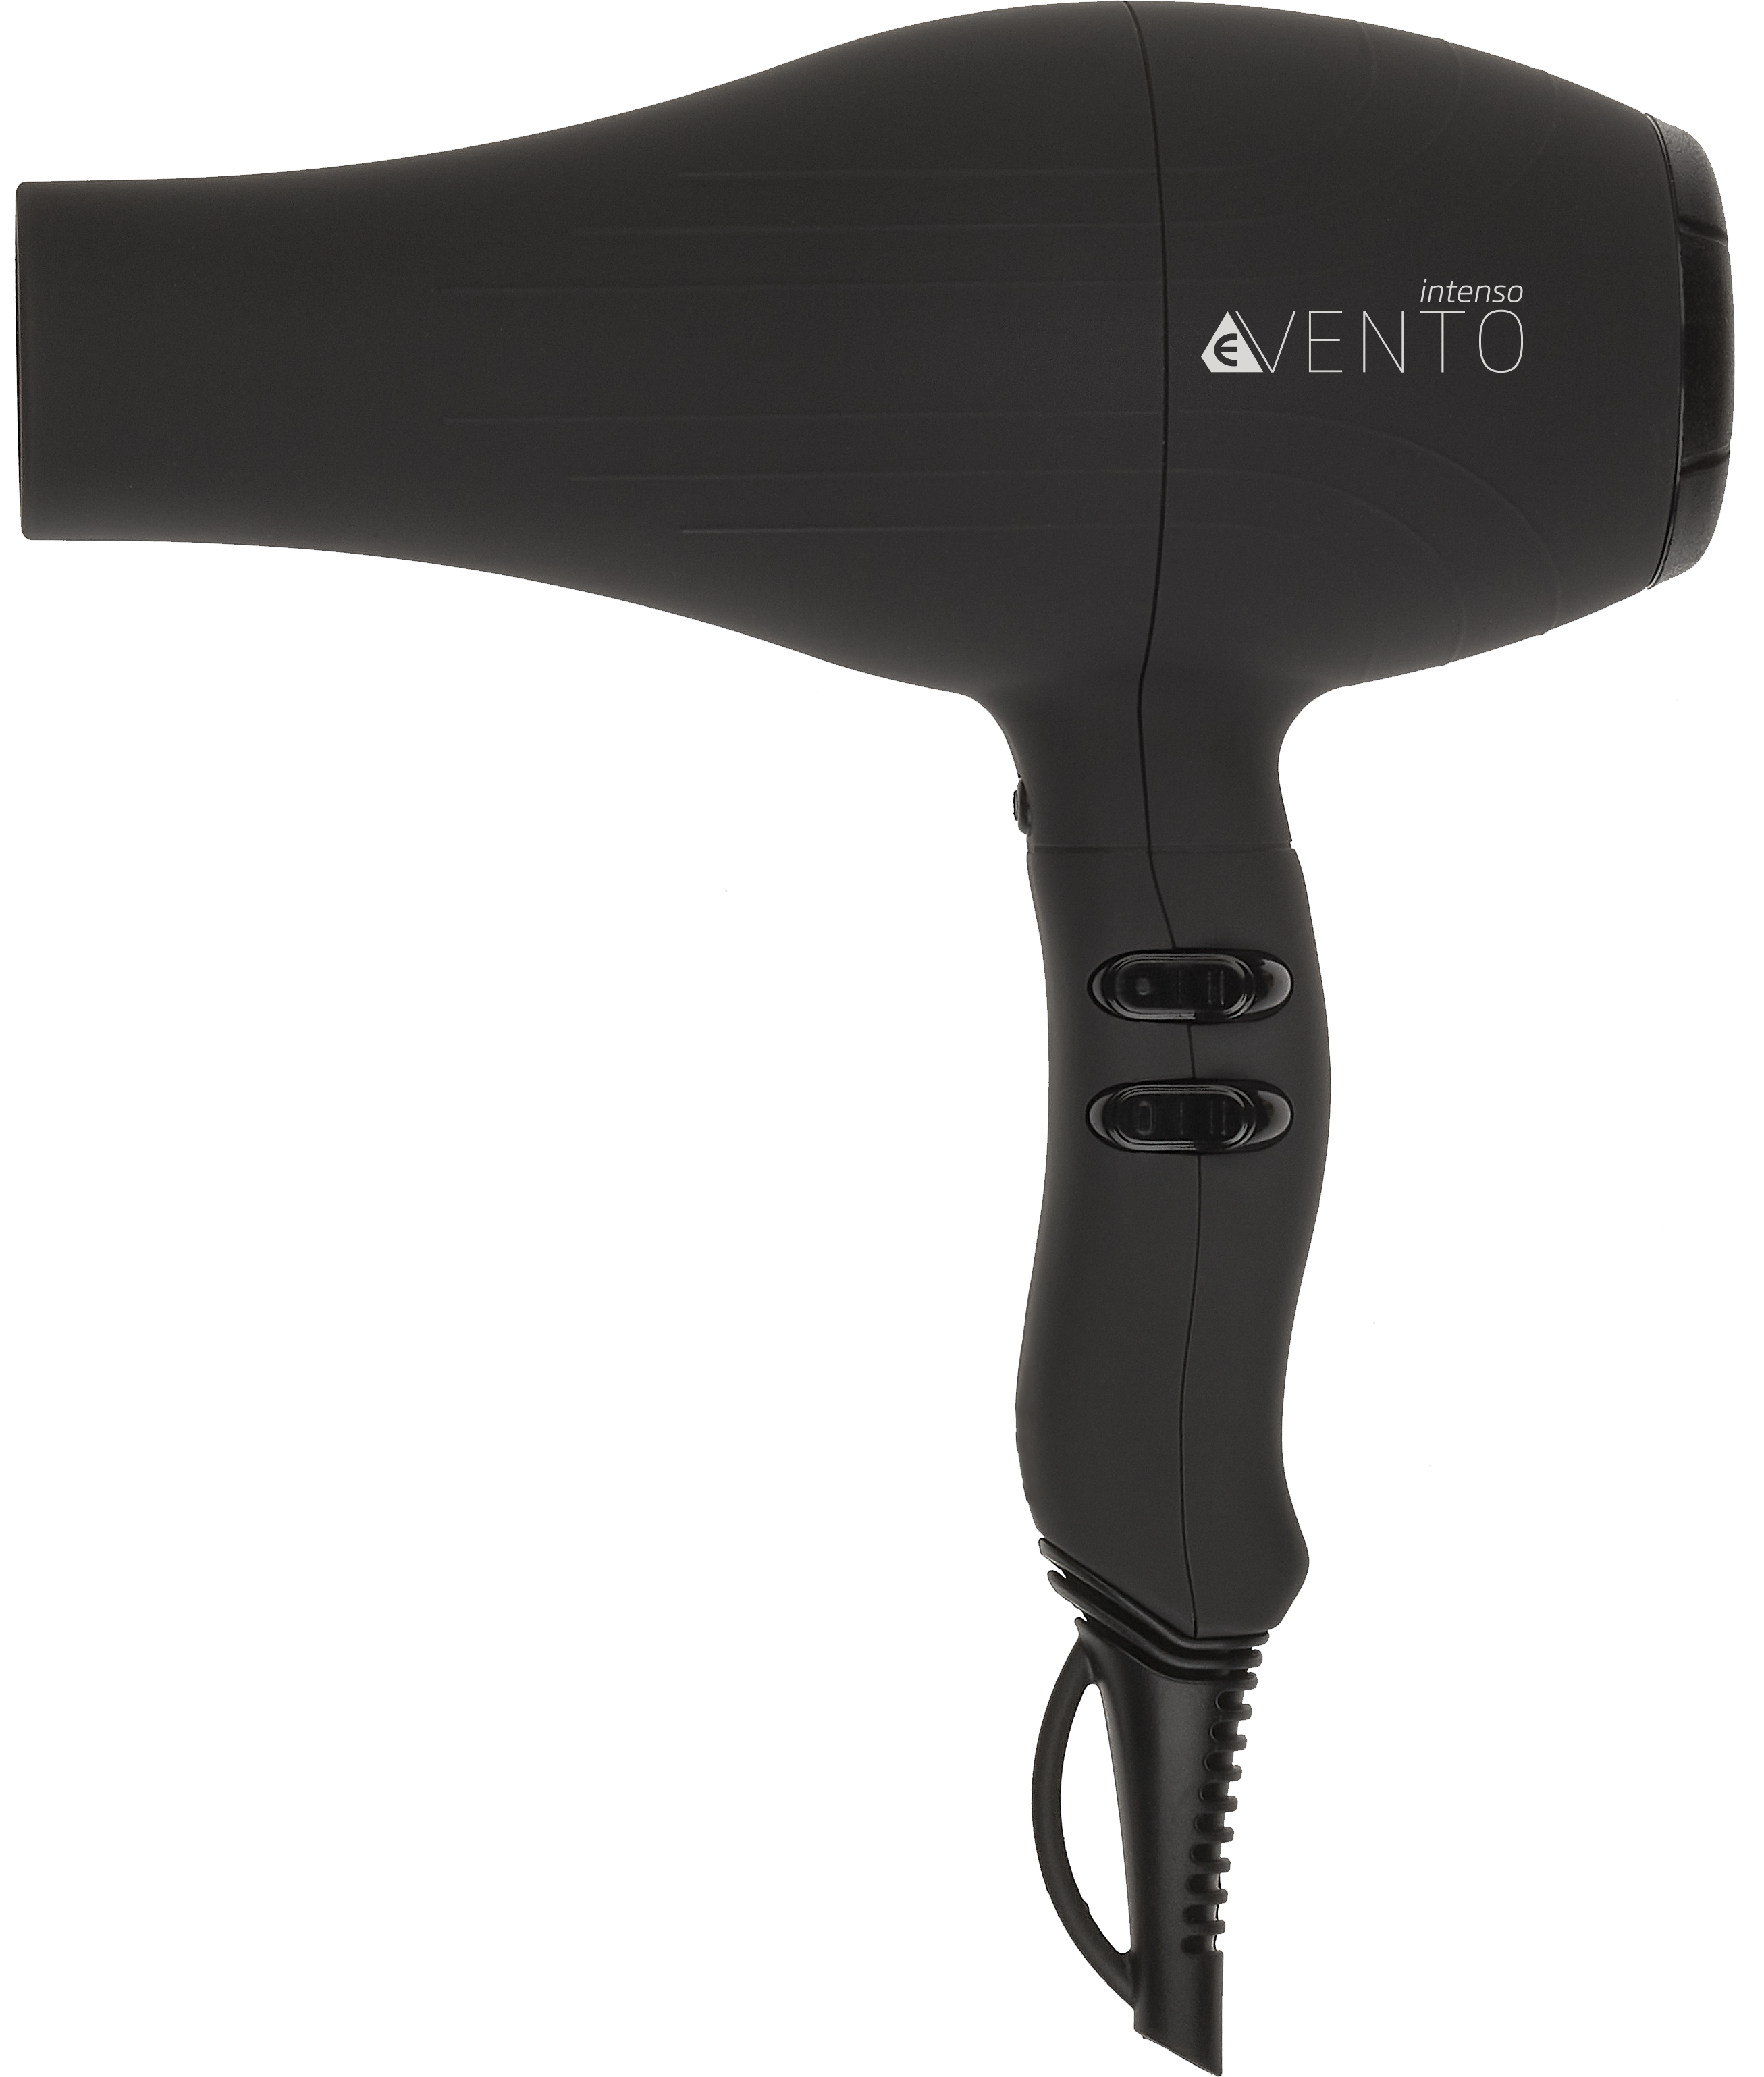 eVENTO intenso Hair dryer